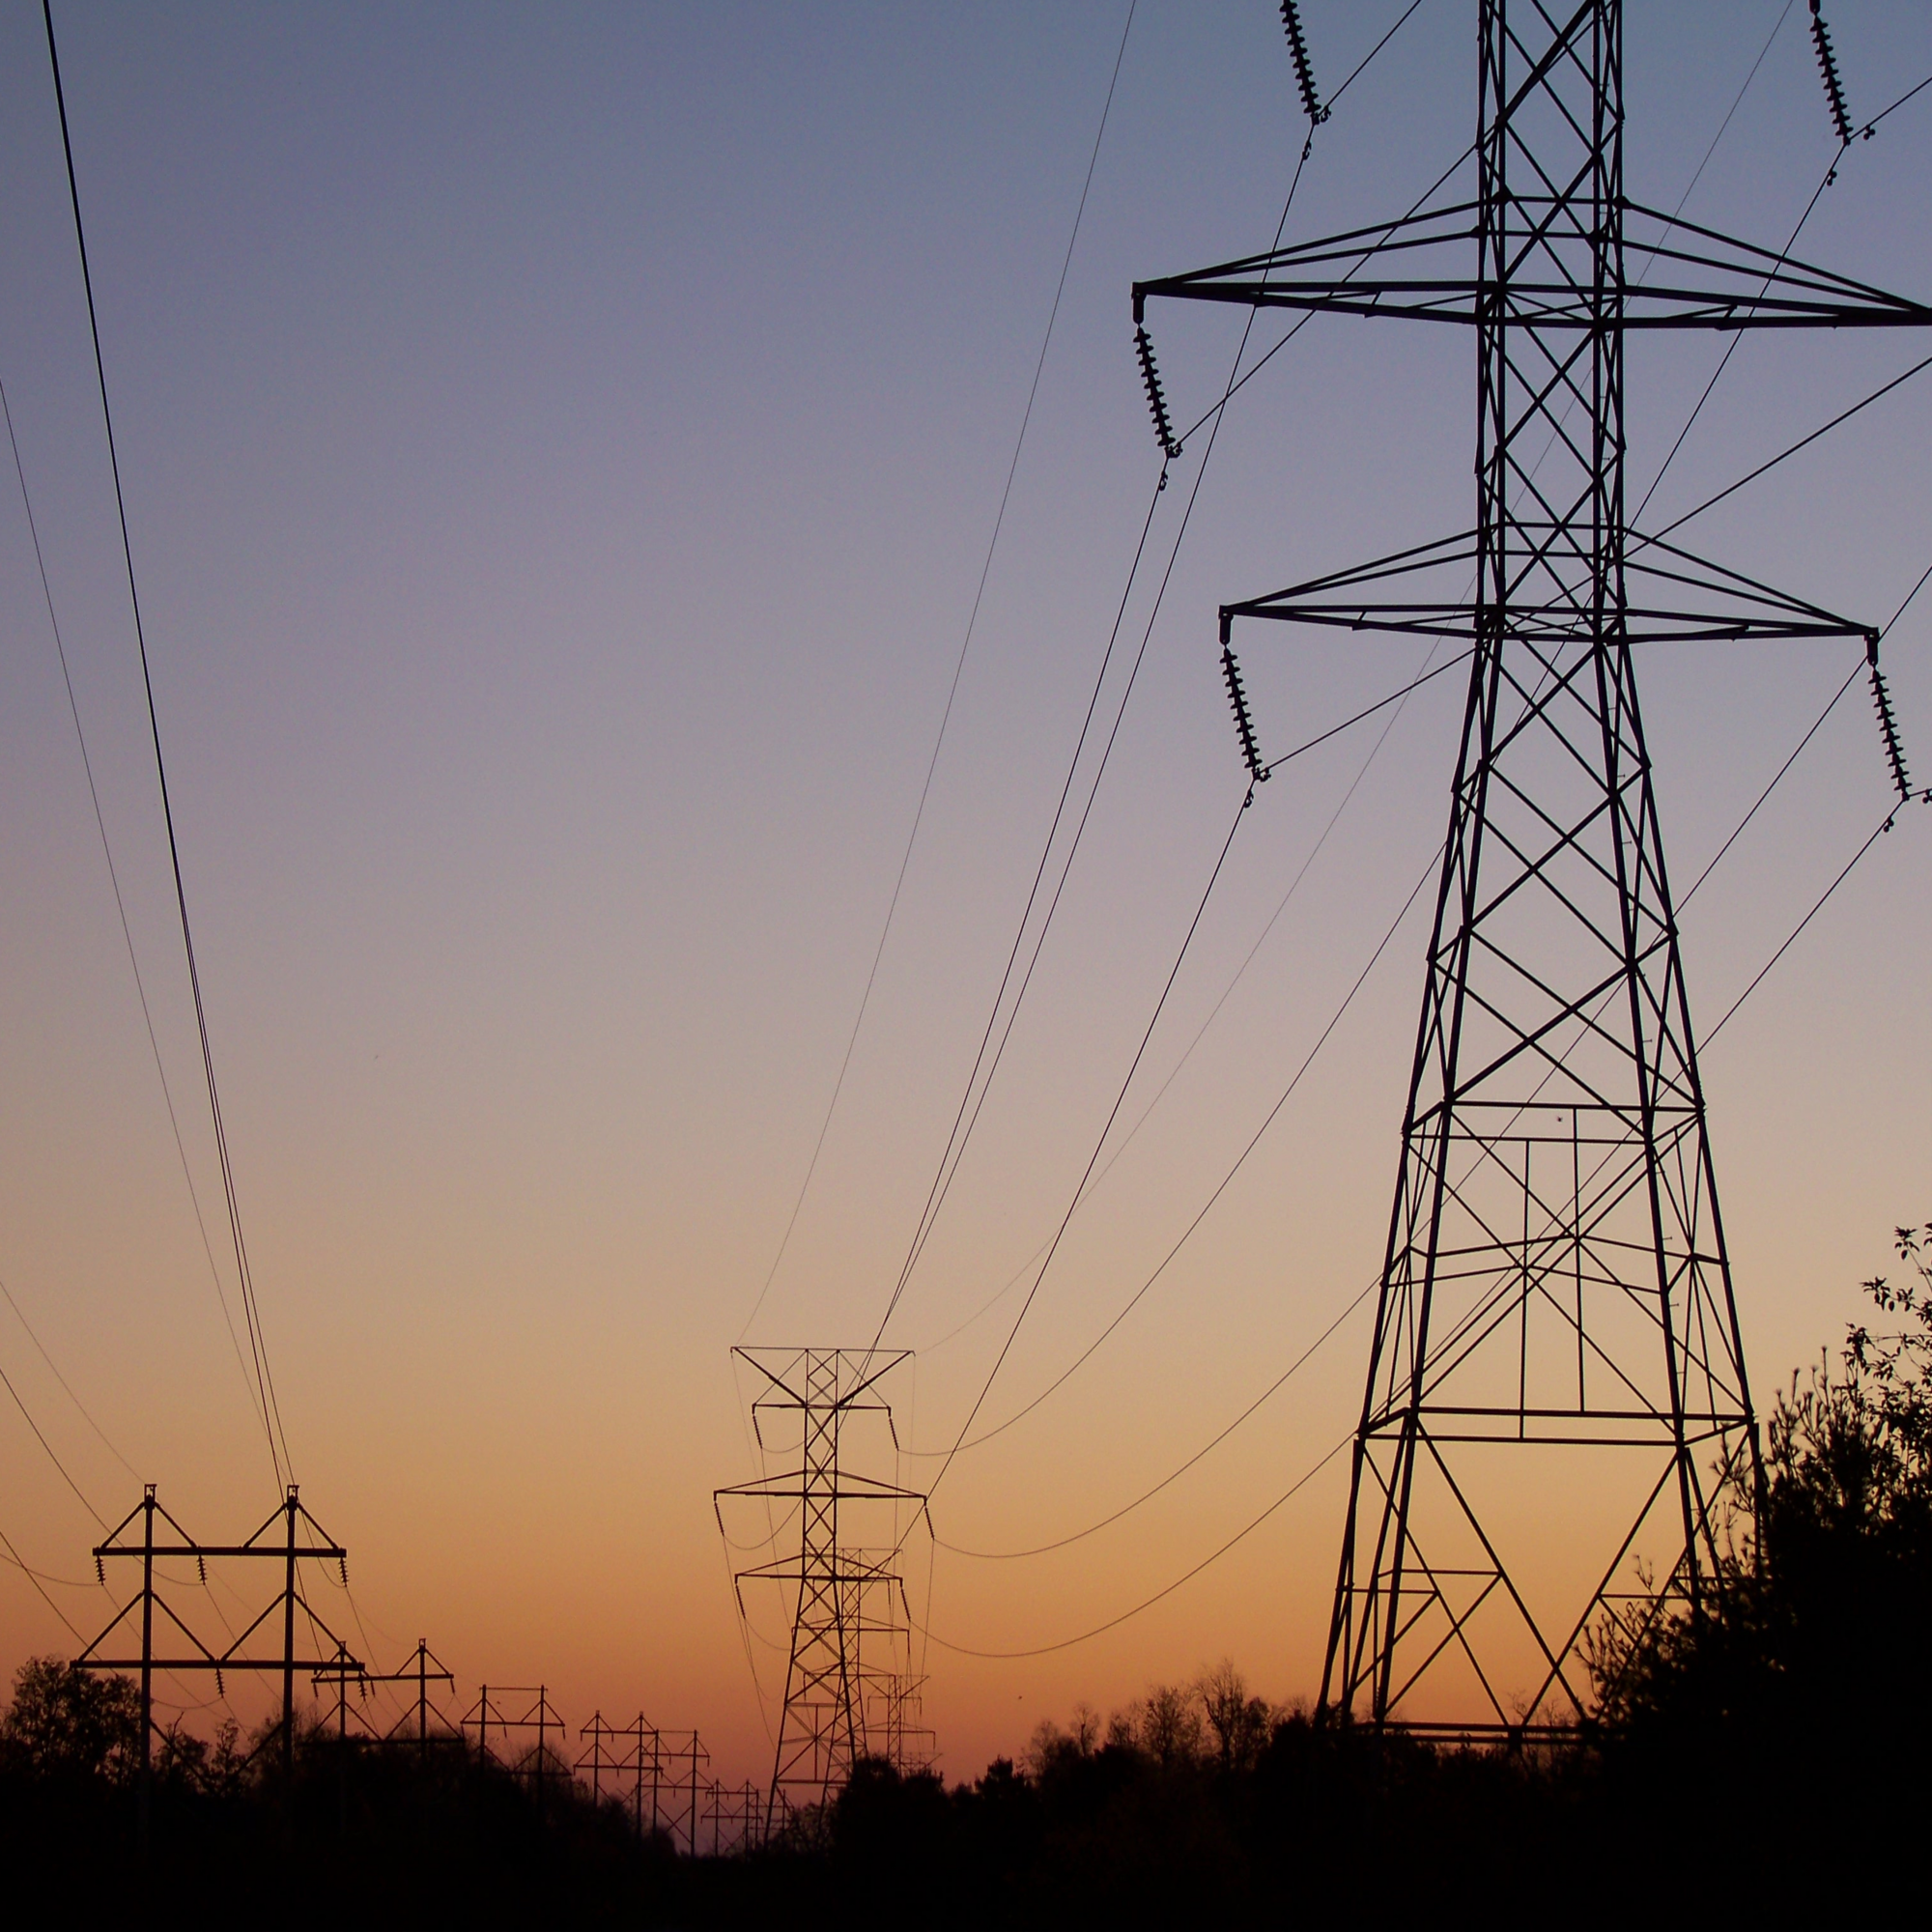 transmission lines with sunset in background